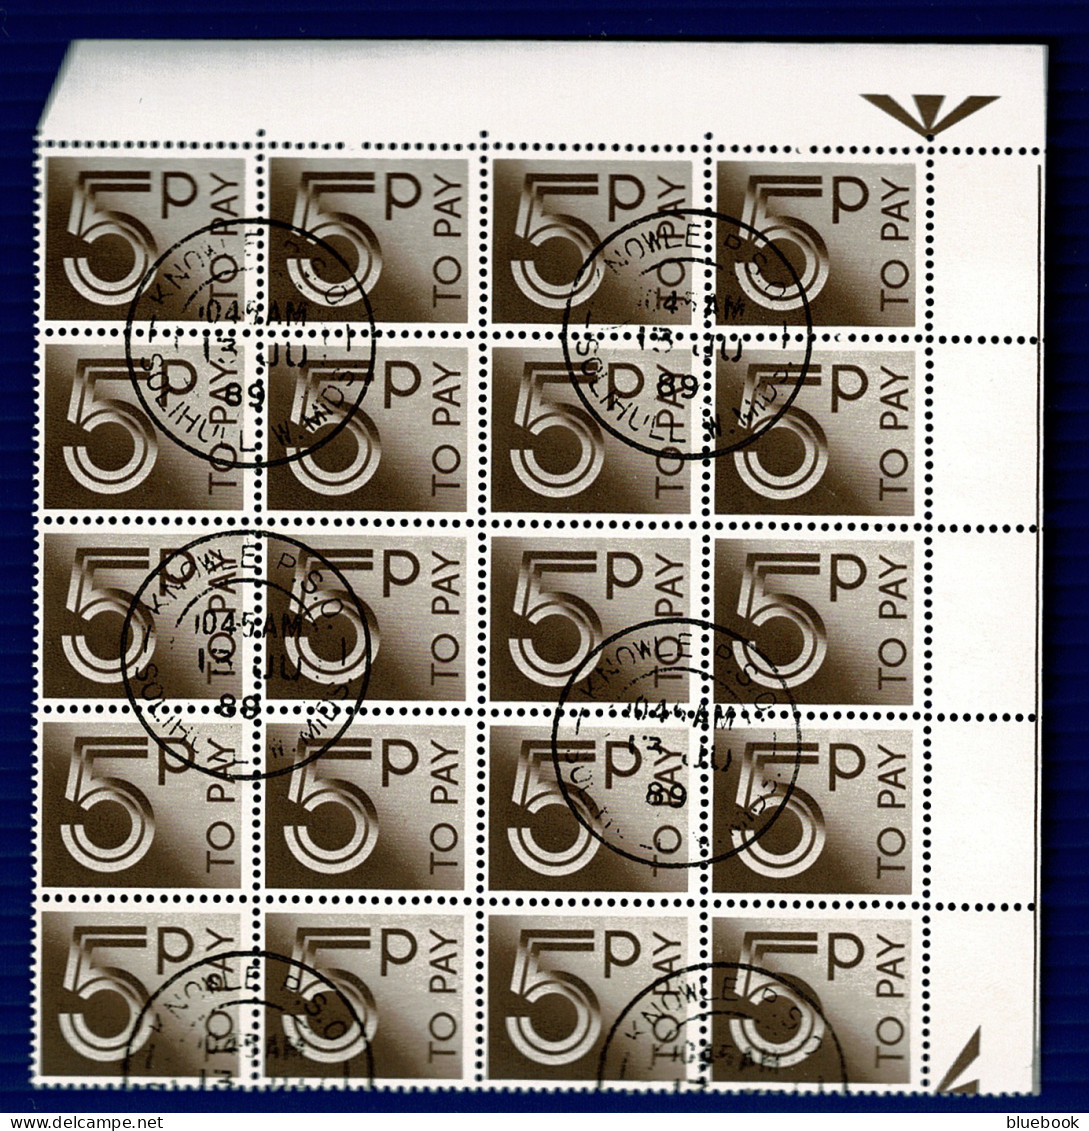 Ref 1608 -  GB 1982 - 5p Postage Due Stamps Scarce Corner Block Of 20 - Fine Used SG D94 - Postage Due